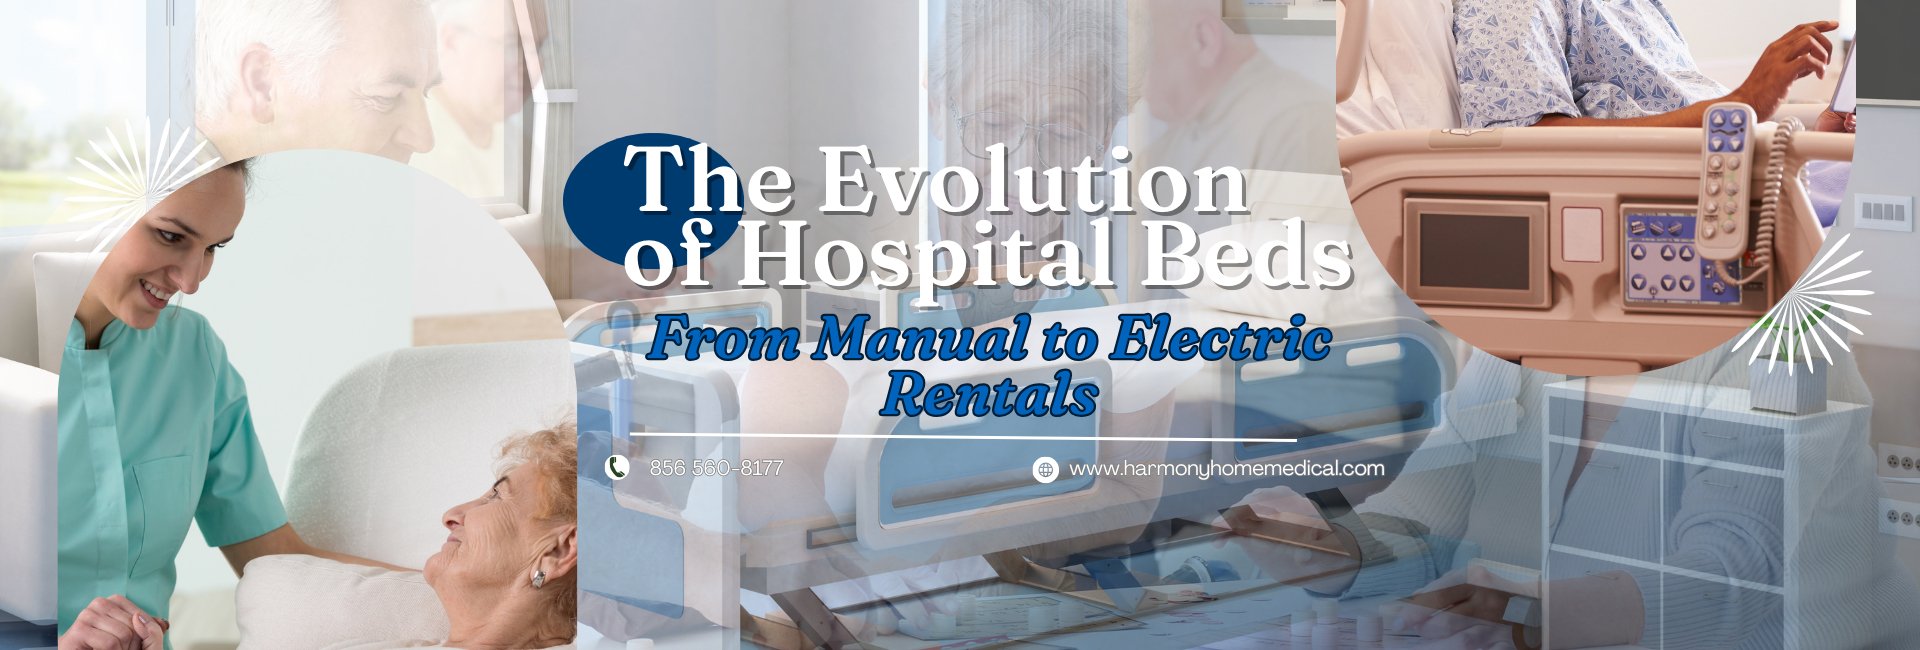 The Evolution of Hospital Beds: From Manual to Electric Rentals